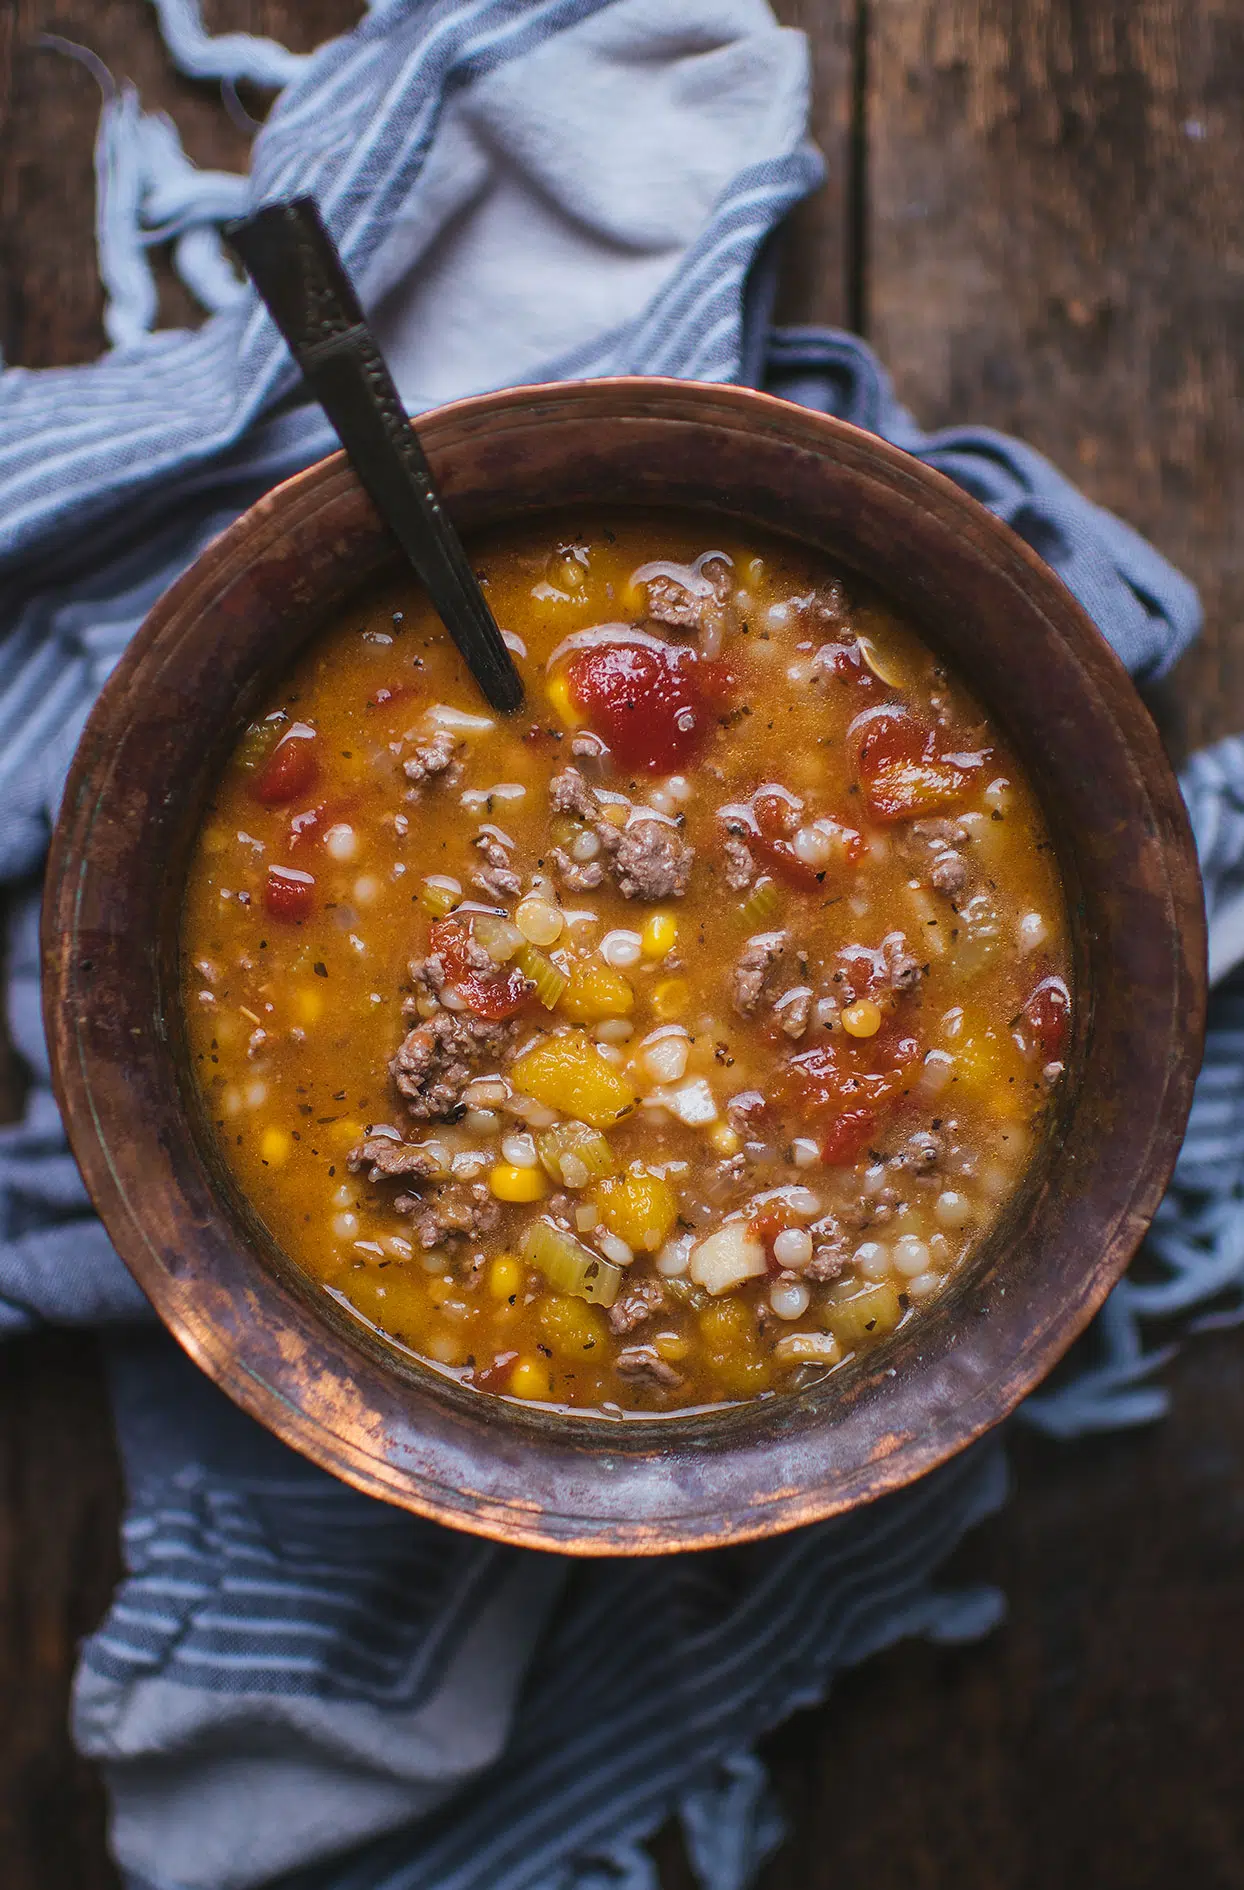 Ground beef, pearl couscous and vegetables soup